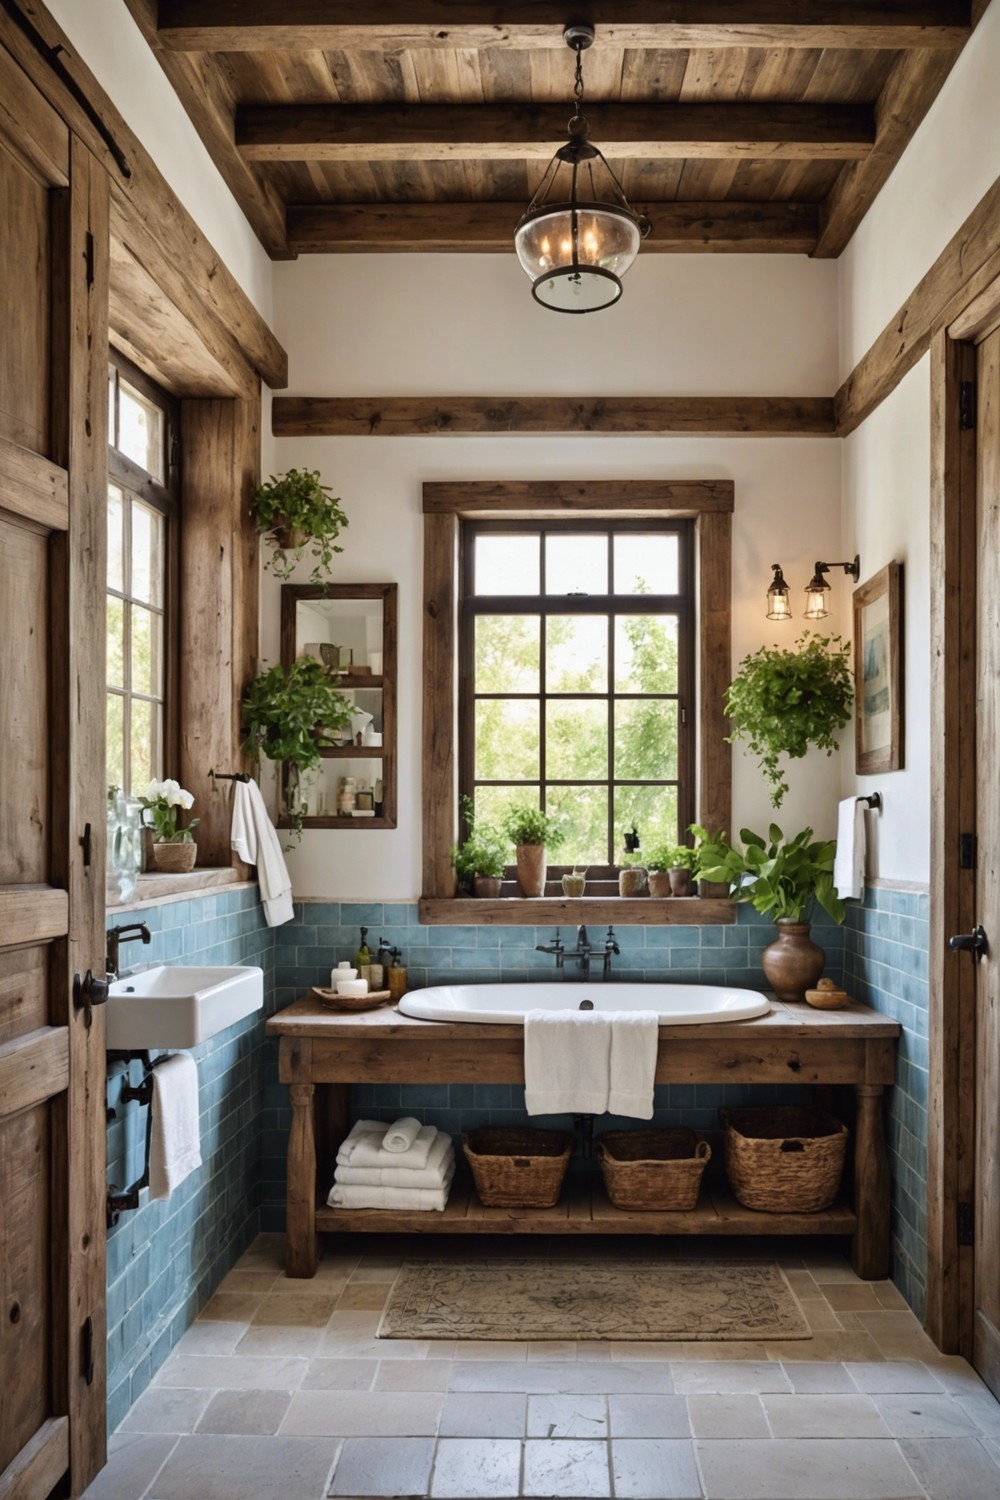 Rustic Wood Accents and Details